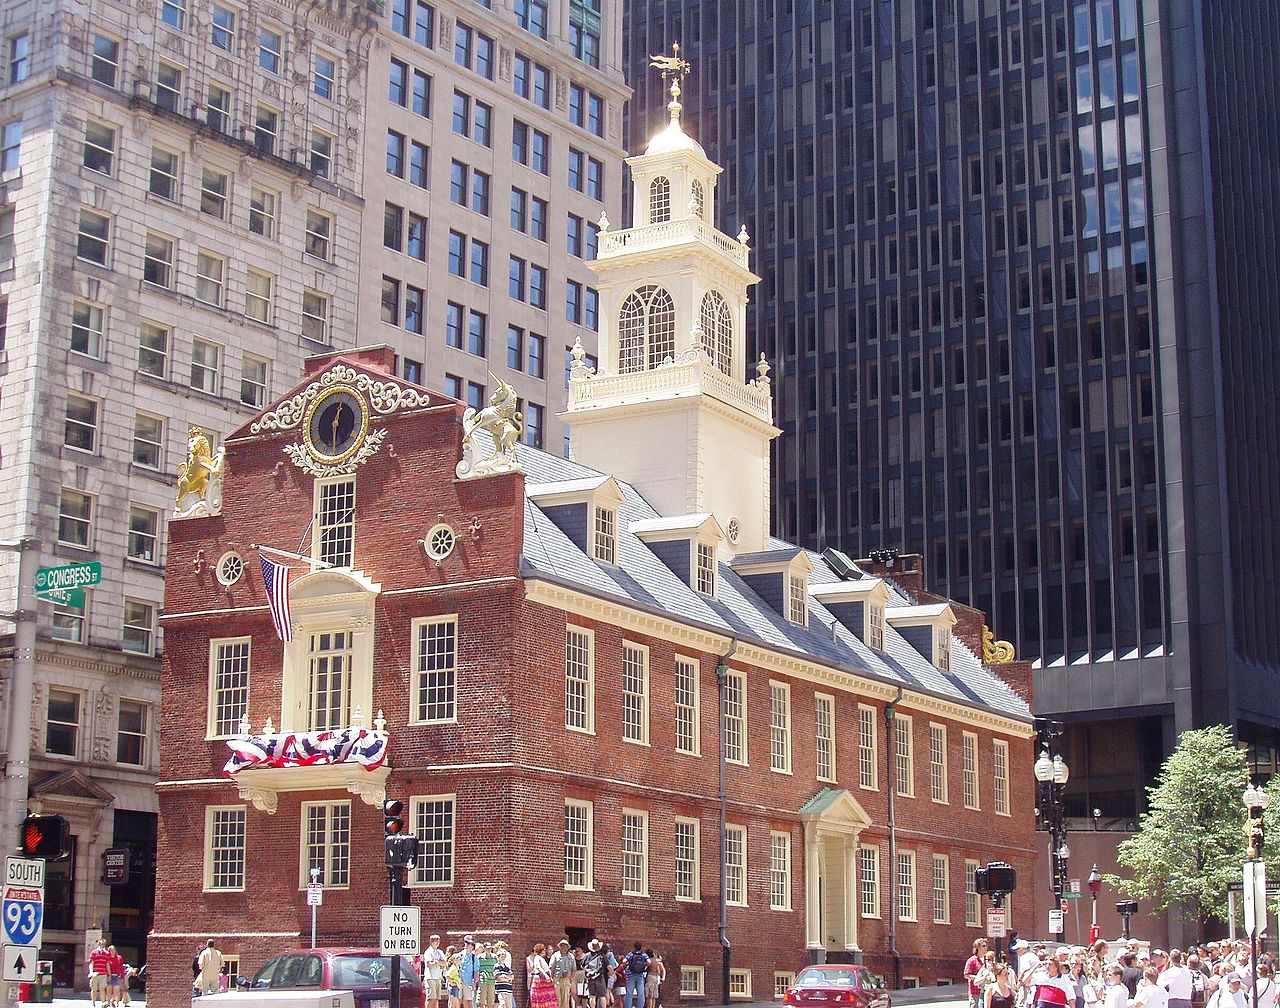 The old State House in Boston, Massachusetts 